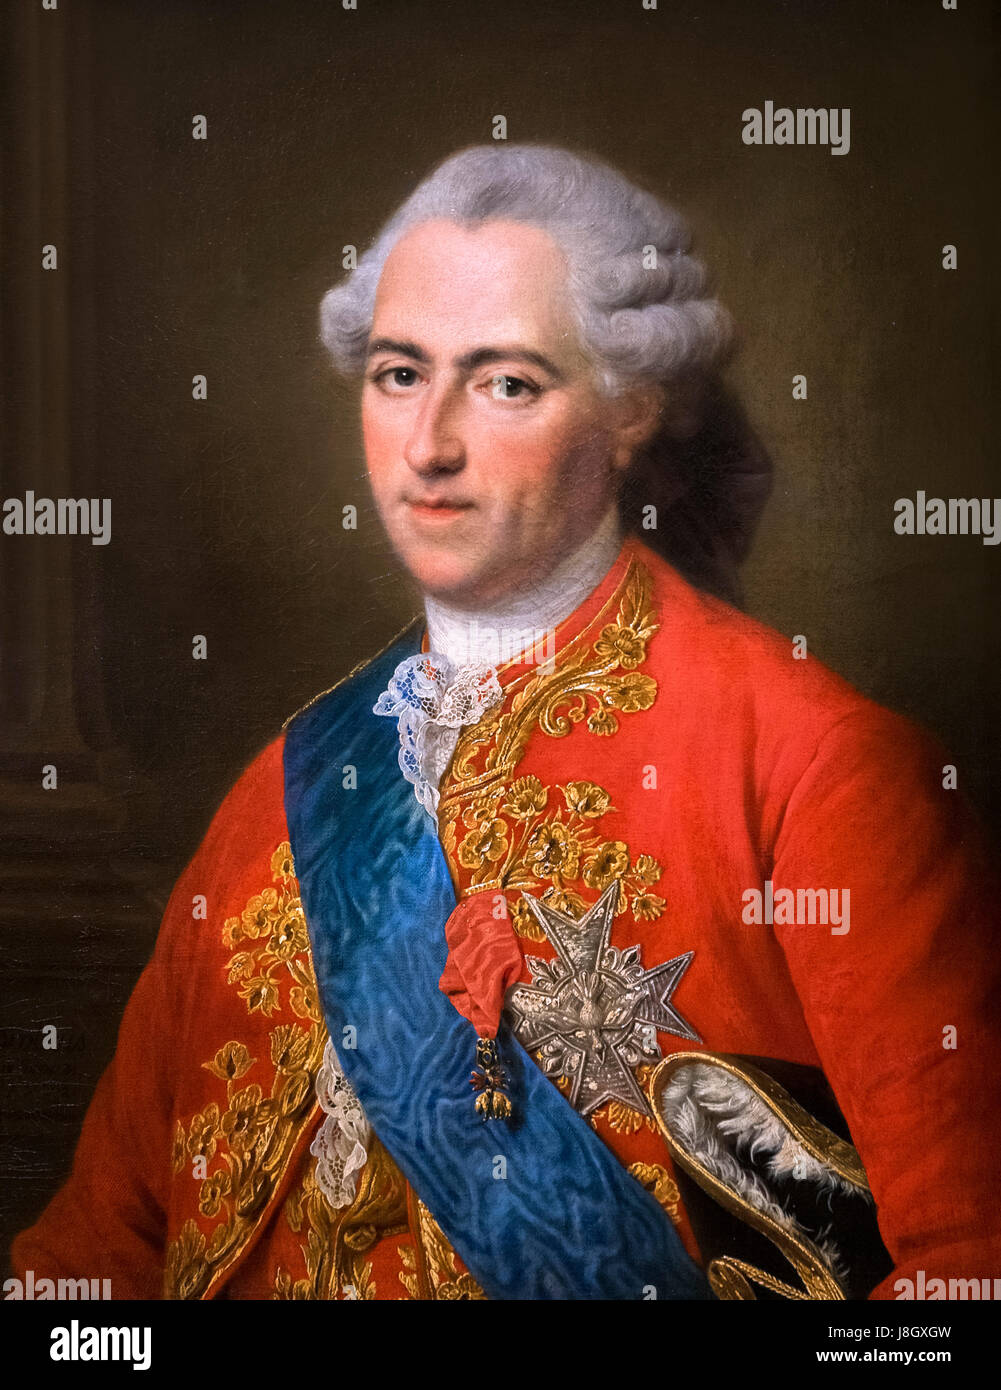 Portrait of King Louis XV of France (1710-1774) by Francois-Hubert Stock Photo: 142972281 - Alamy